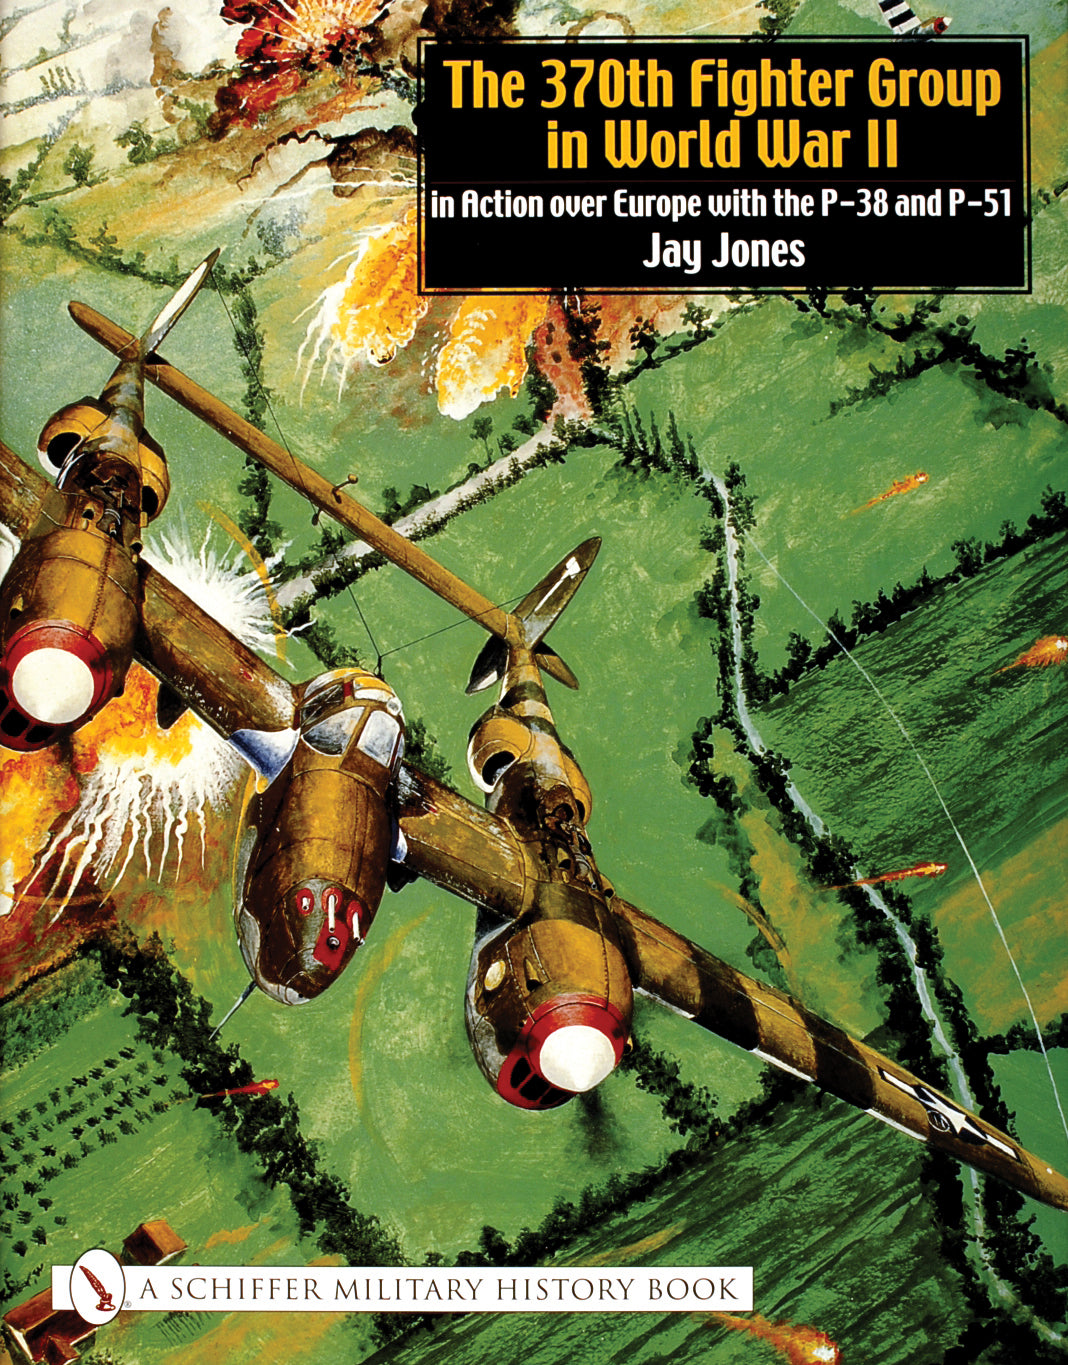 The 370th Fighter Group in World War II